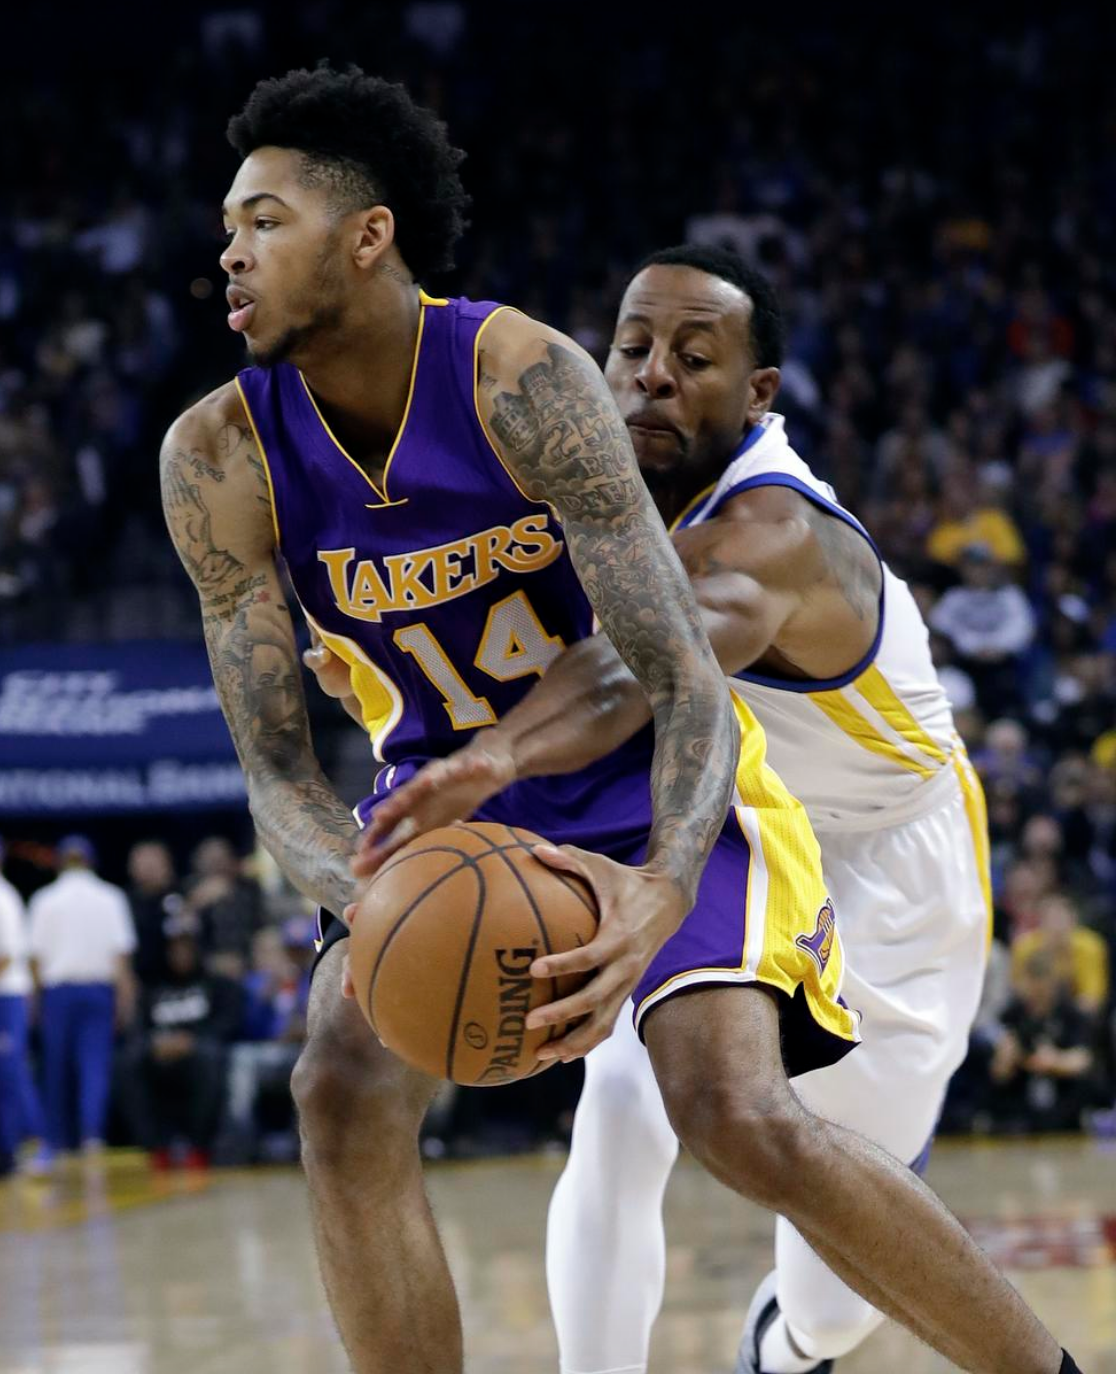 Lakers rookie Brandon Ingram drives to the basket as the Warriors' Andre Iguodala defends during the first half of Wednesday's game in Oakland. AP Photo: Marcio Jose Sanchez